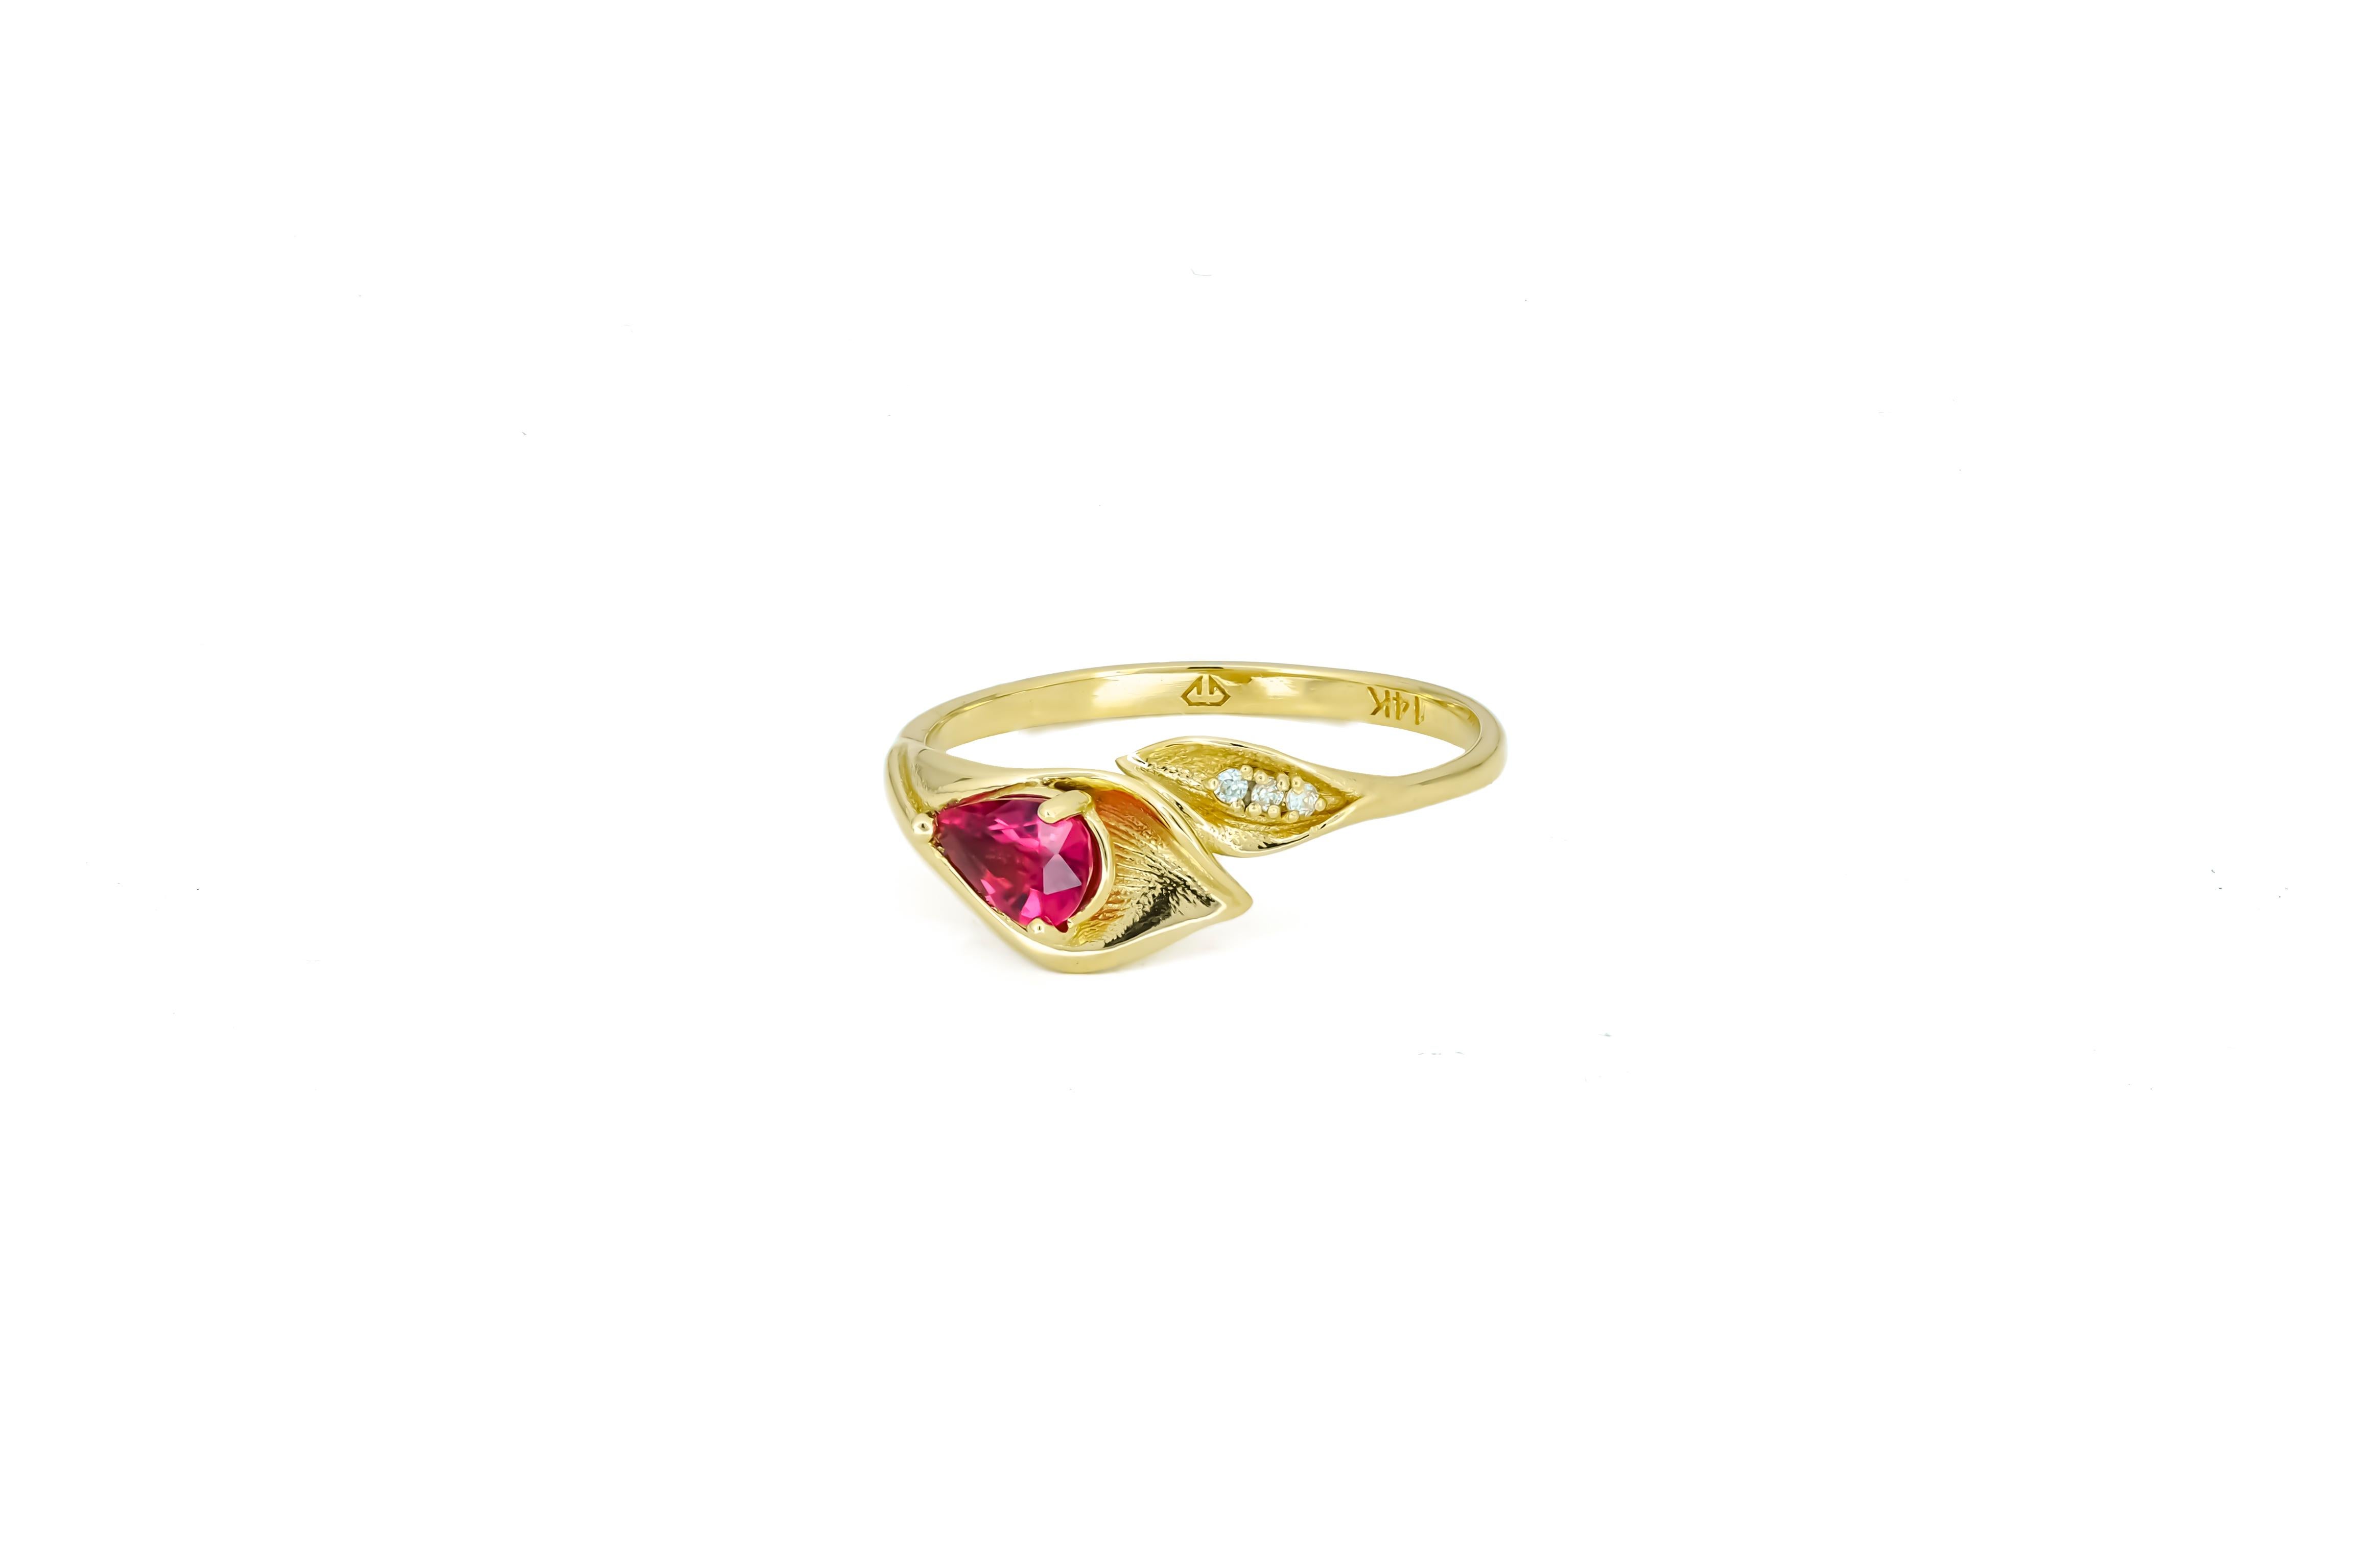 Lily Calla Gold Ring, 14 Karat Gold Ring with Garnet and Diamonds For Sale 2